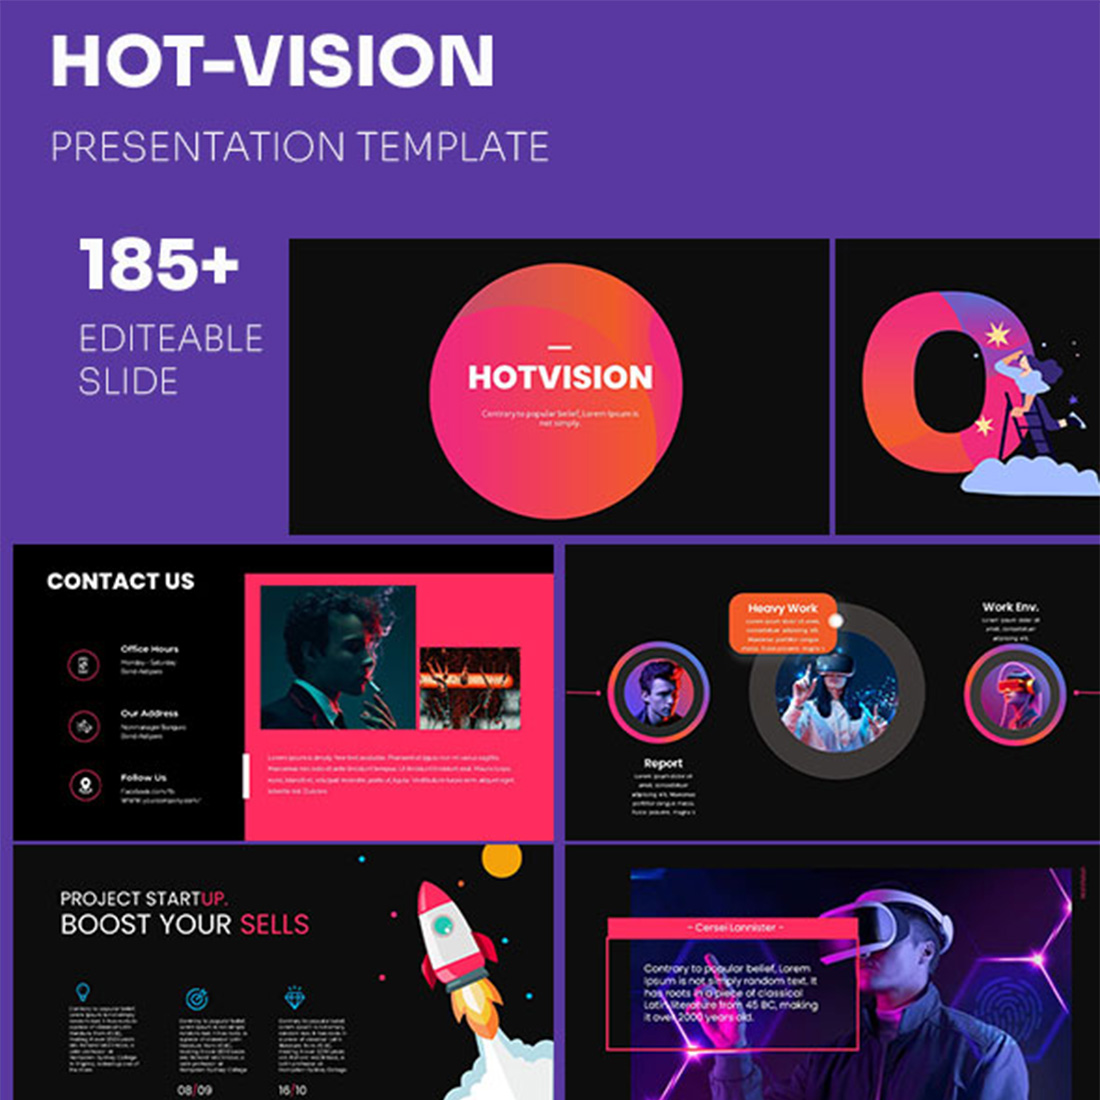 Hot-Vision Power Point Presentation Template cover image.